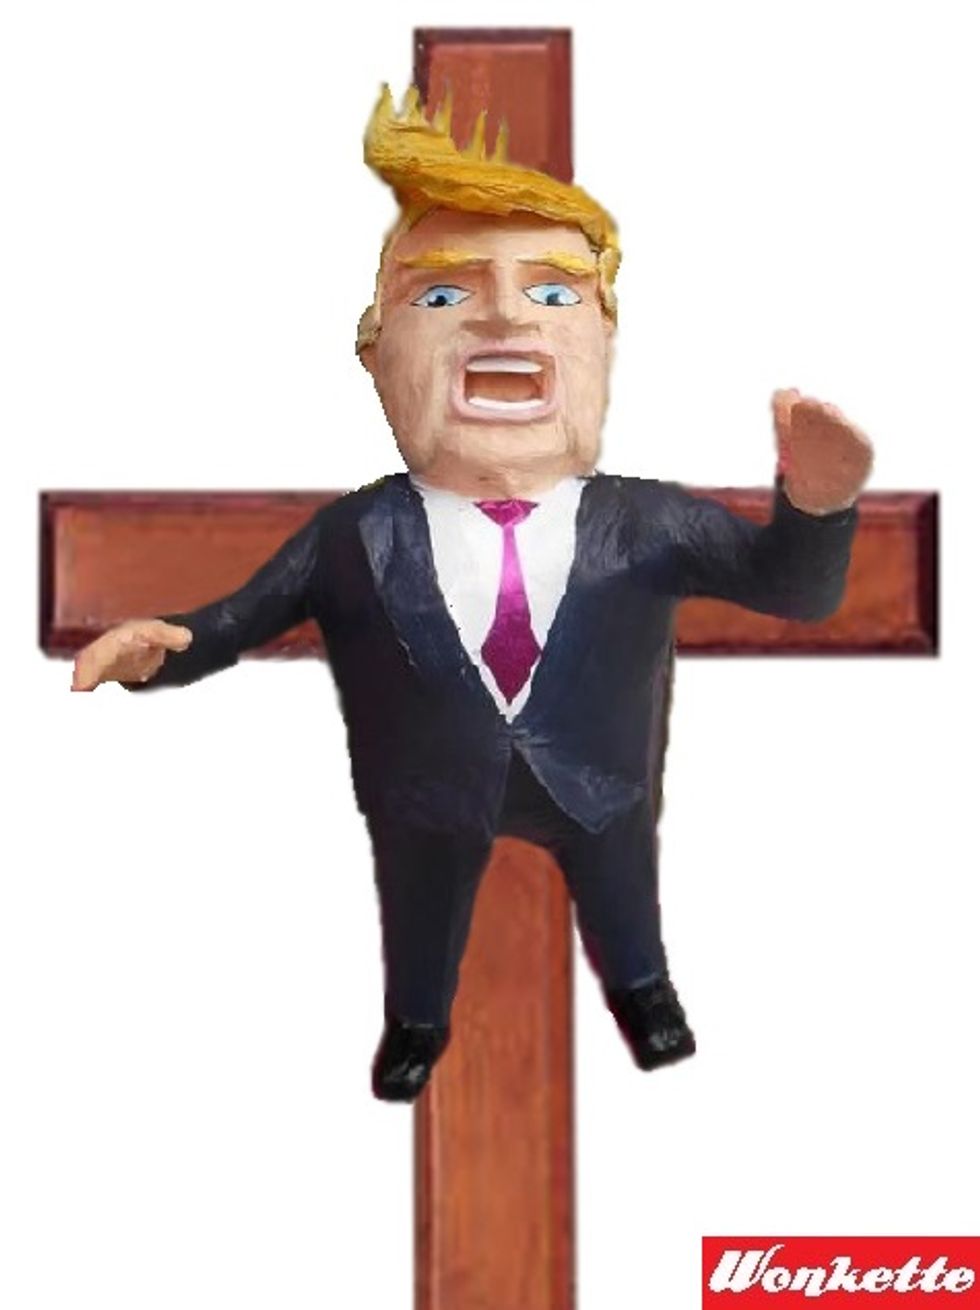 IRS Comes For Donald Trump Because Of How Much He Loves Jesus